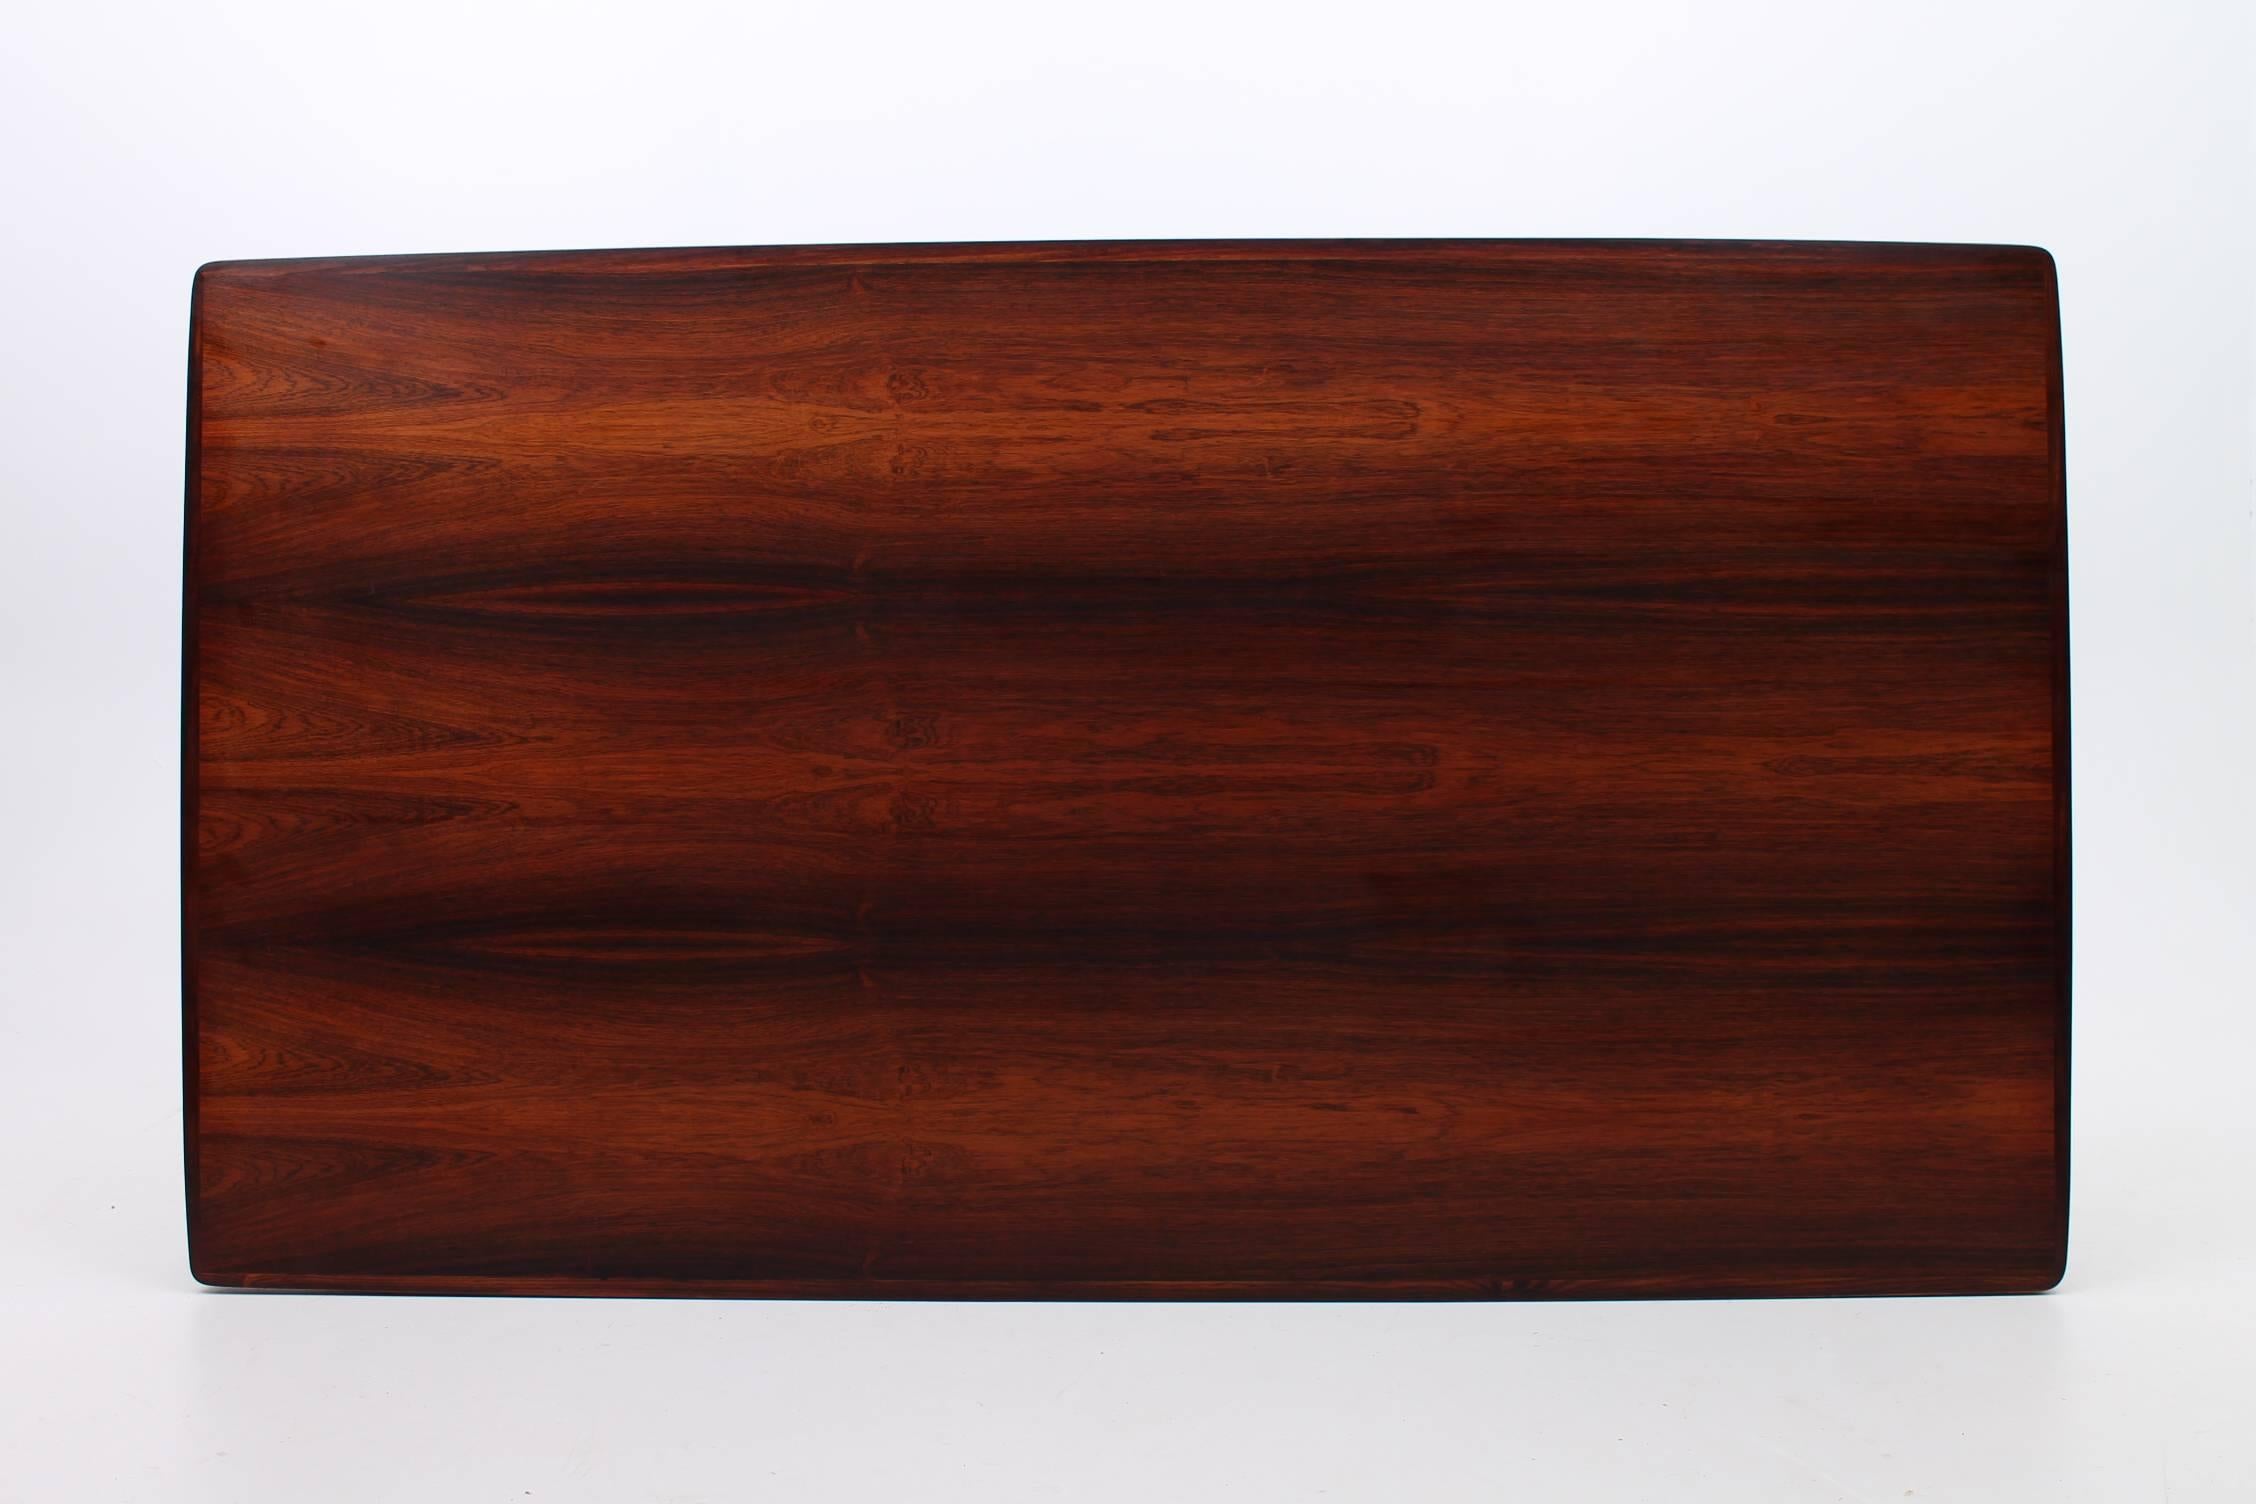 Stunning rosewood designed by Arne Vodder for Sibast Furniture. This huge table has two self storing leaves that discreetly hide underneath the tabletop. The vibrant rosewood grain adds a level of elegance to the minimalistic table. The table has